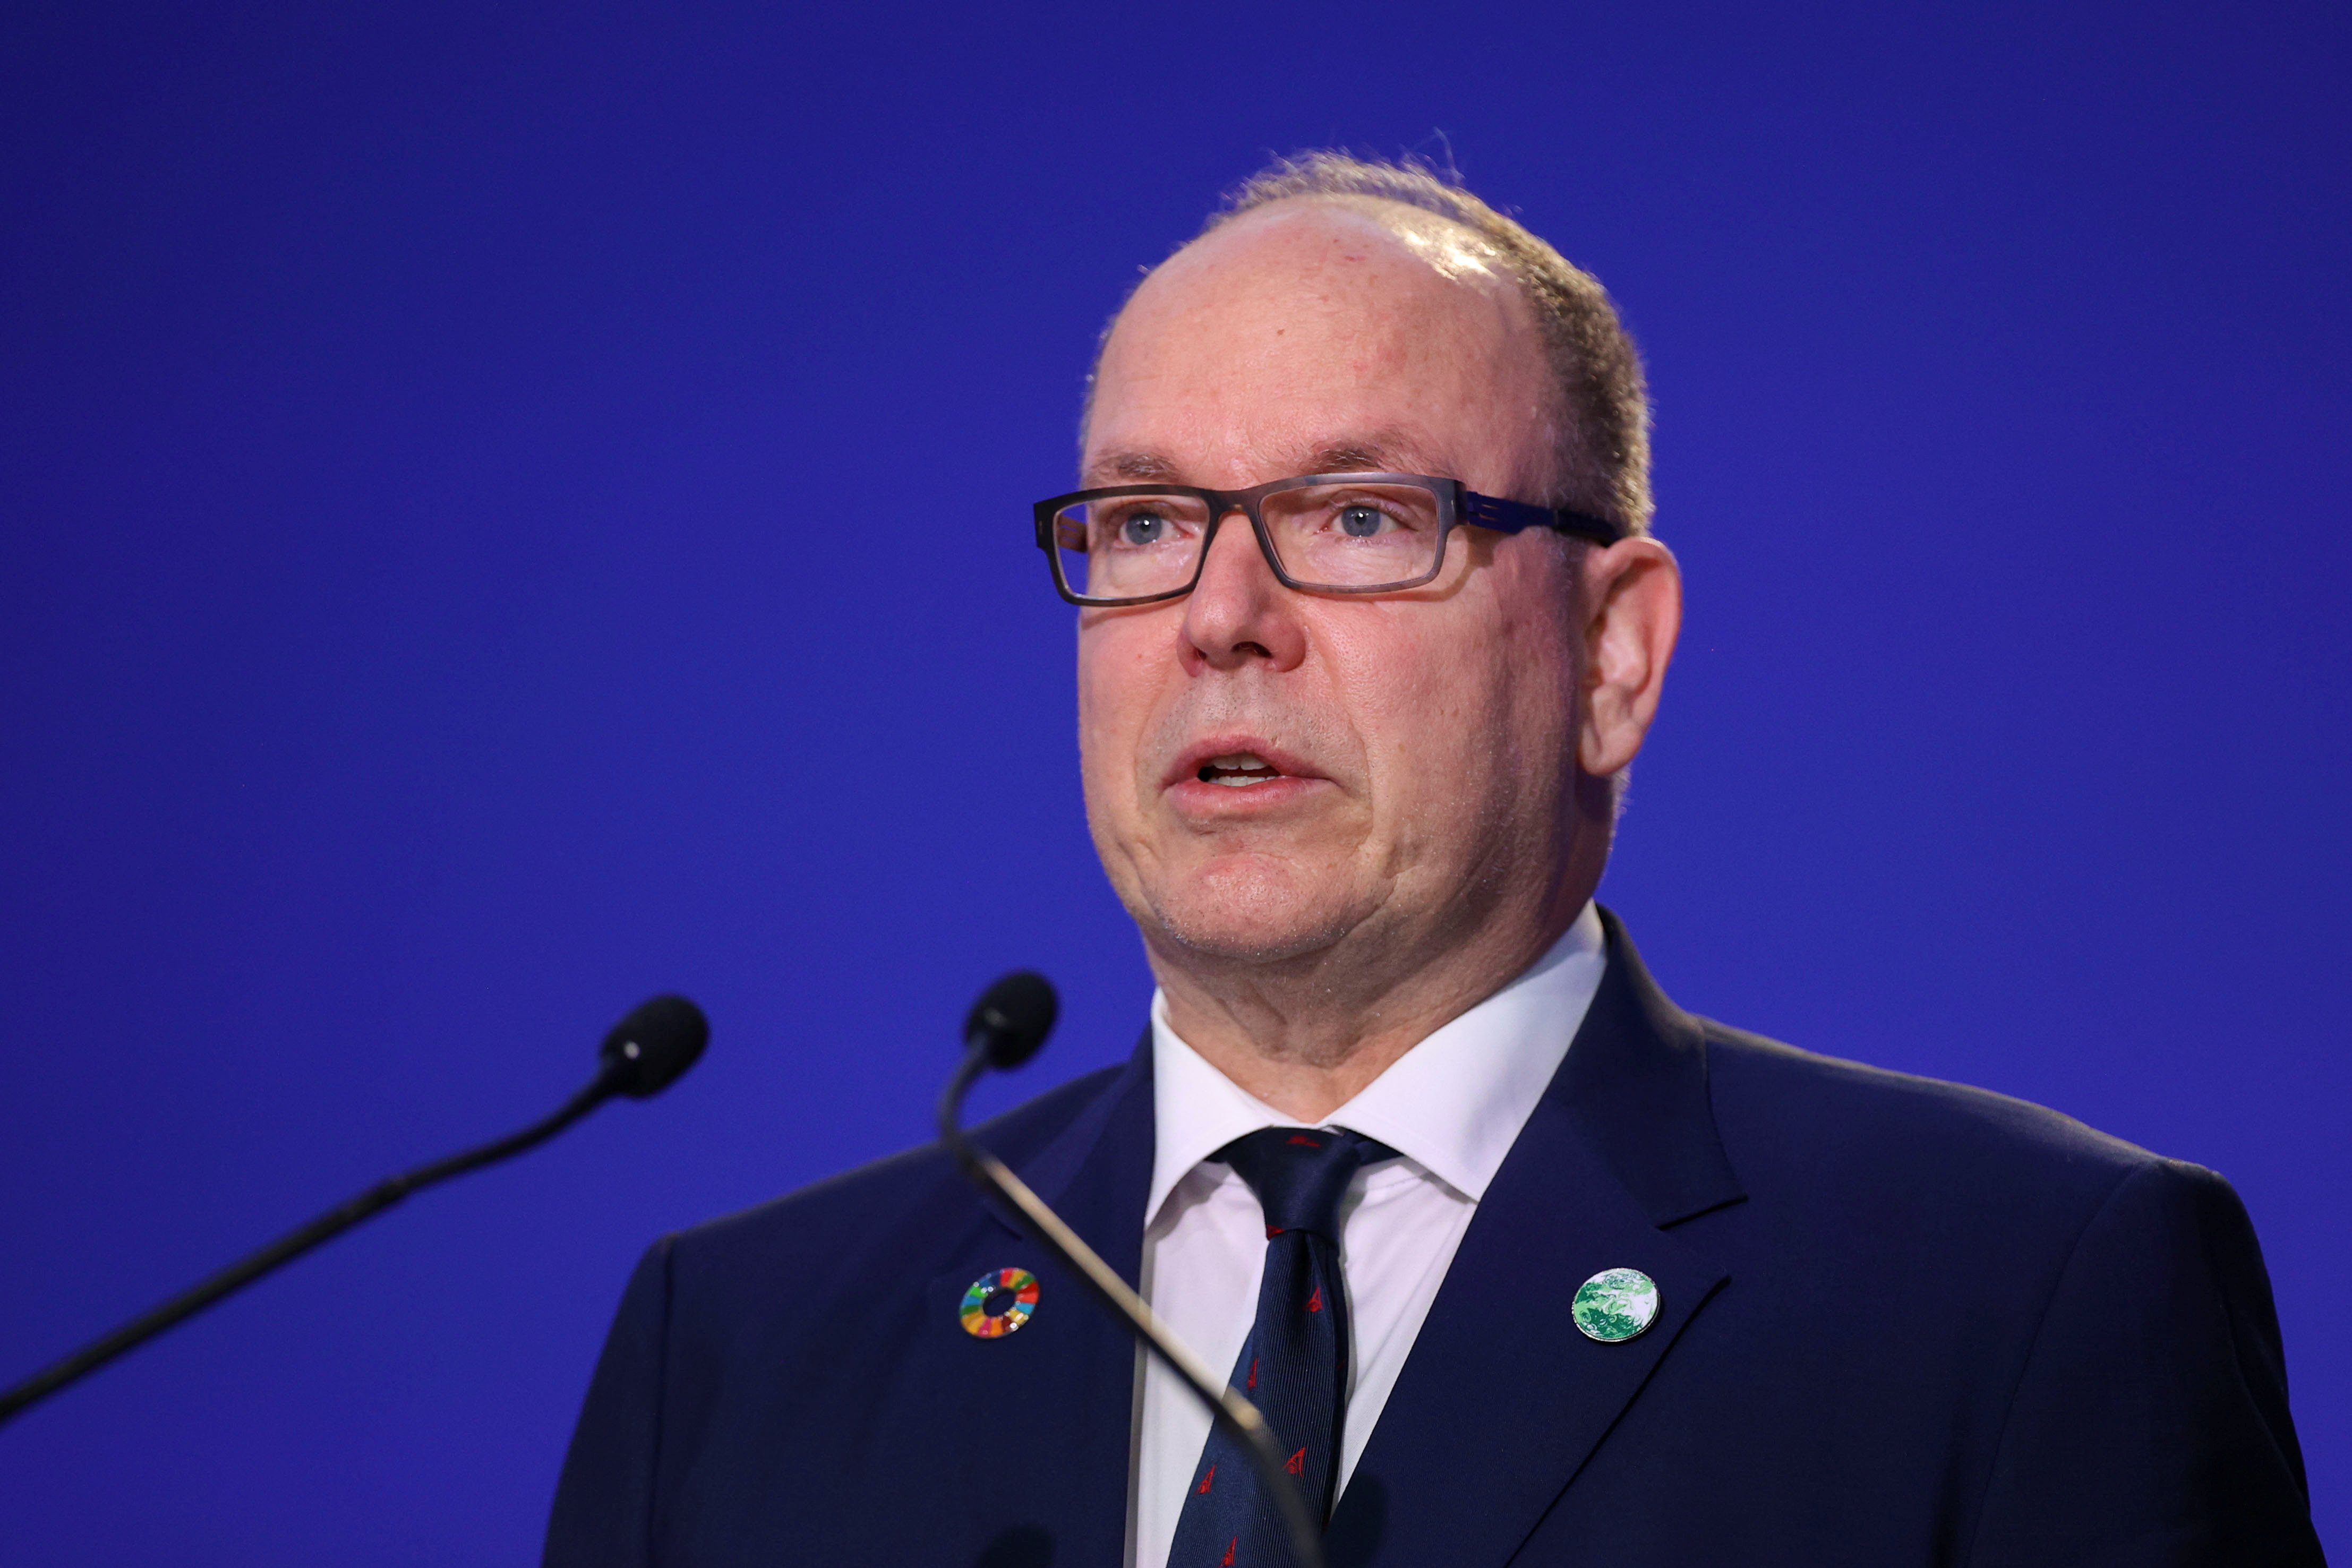 Prince Albert II of Monaco speaks during the UN Climate Change Conference on day three of COP26 at SECC on November 2, 2021 in Glasgow, Scotland | Source: Getty Images